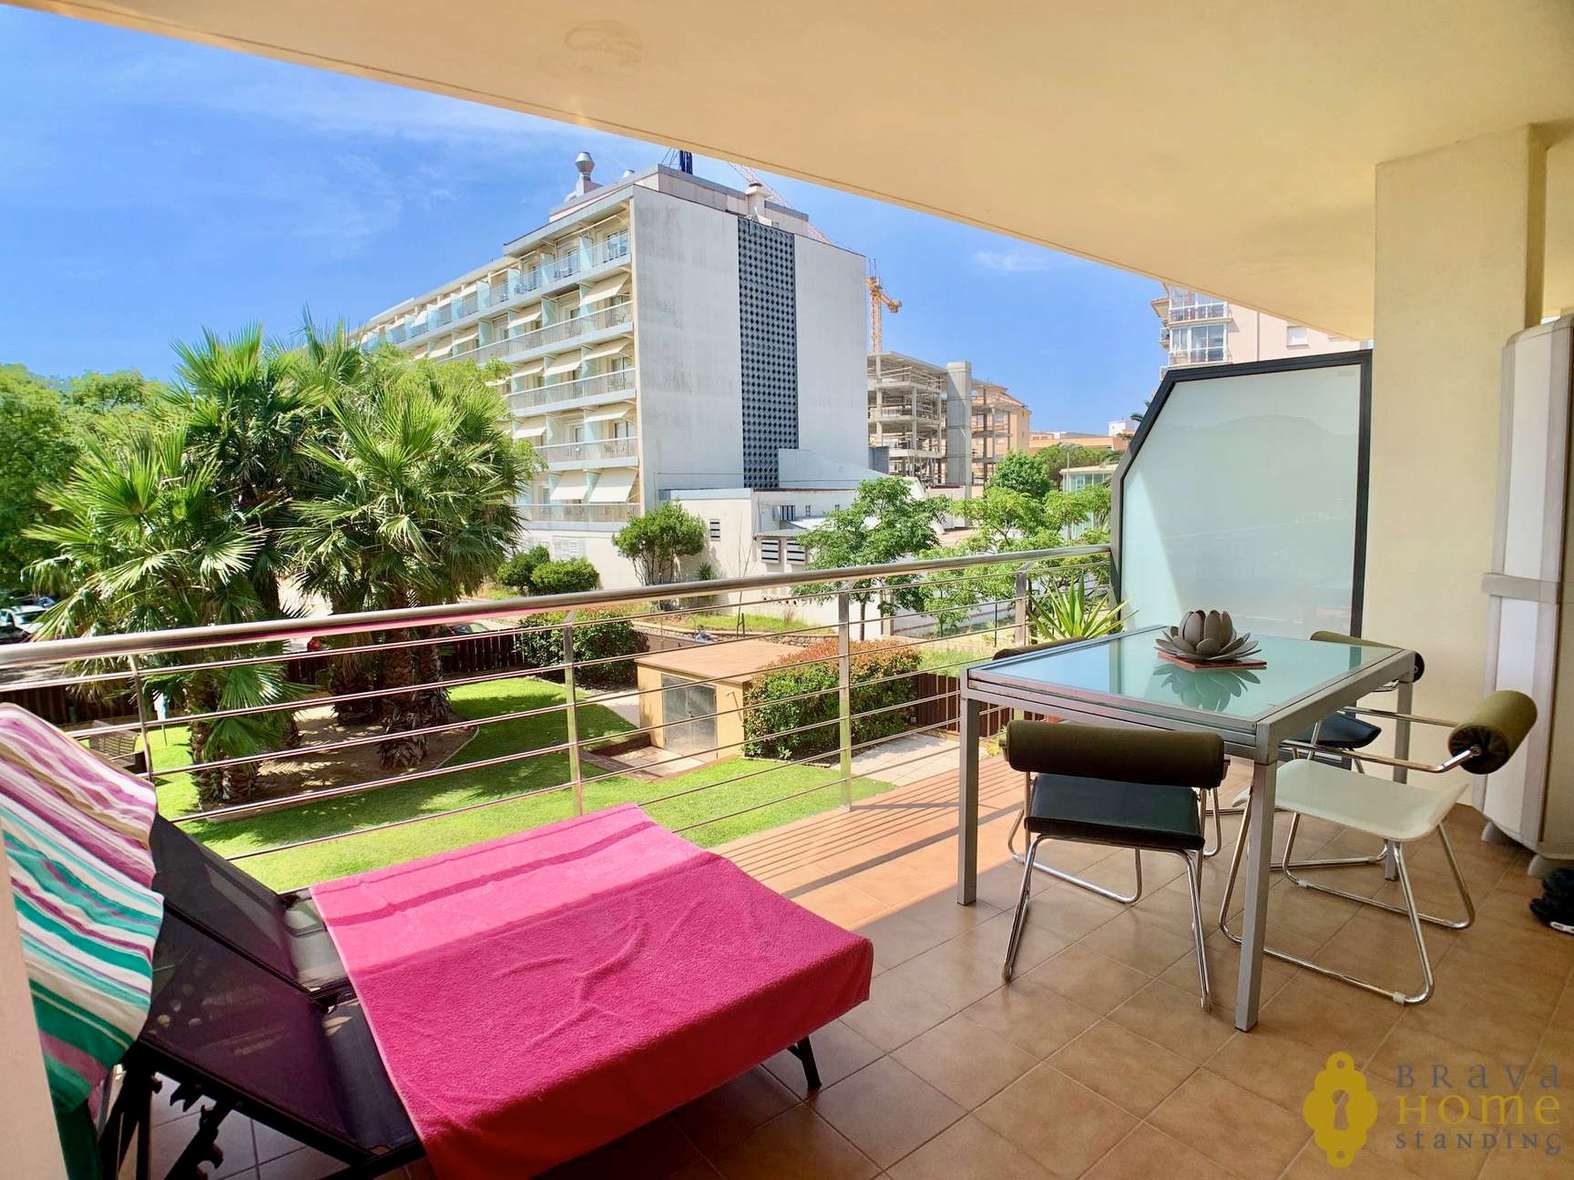 Splendid apartment in 1st line of the sea with pool for sale in Rosas - Salatar